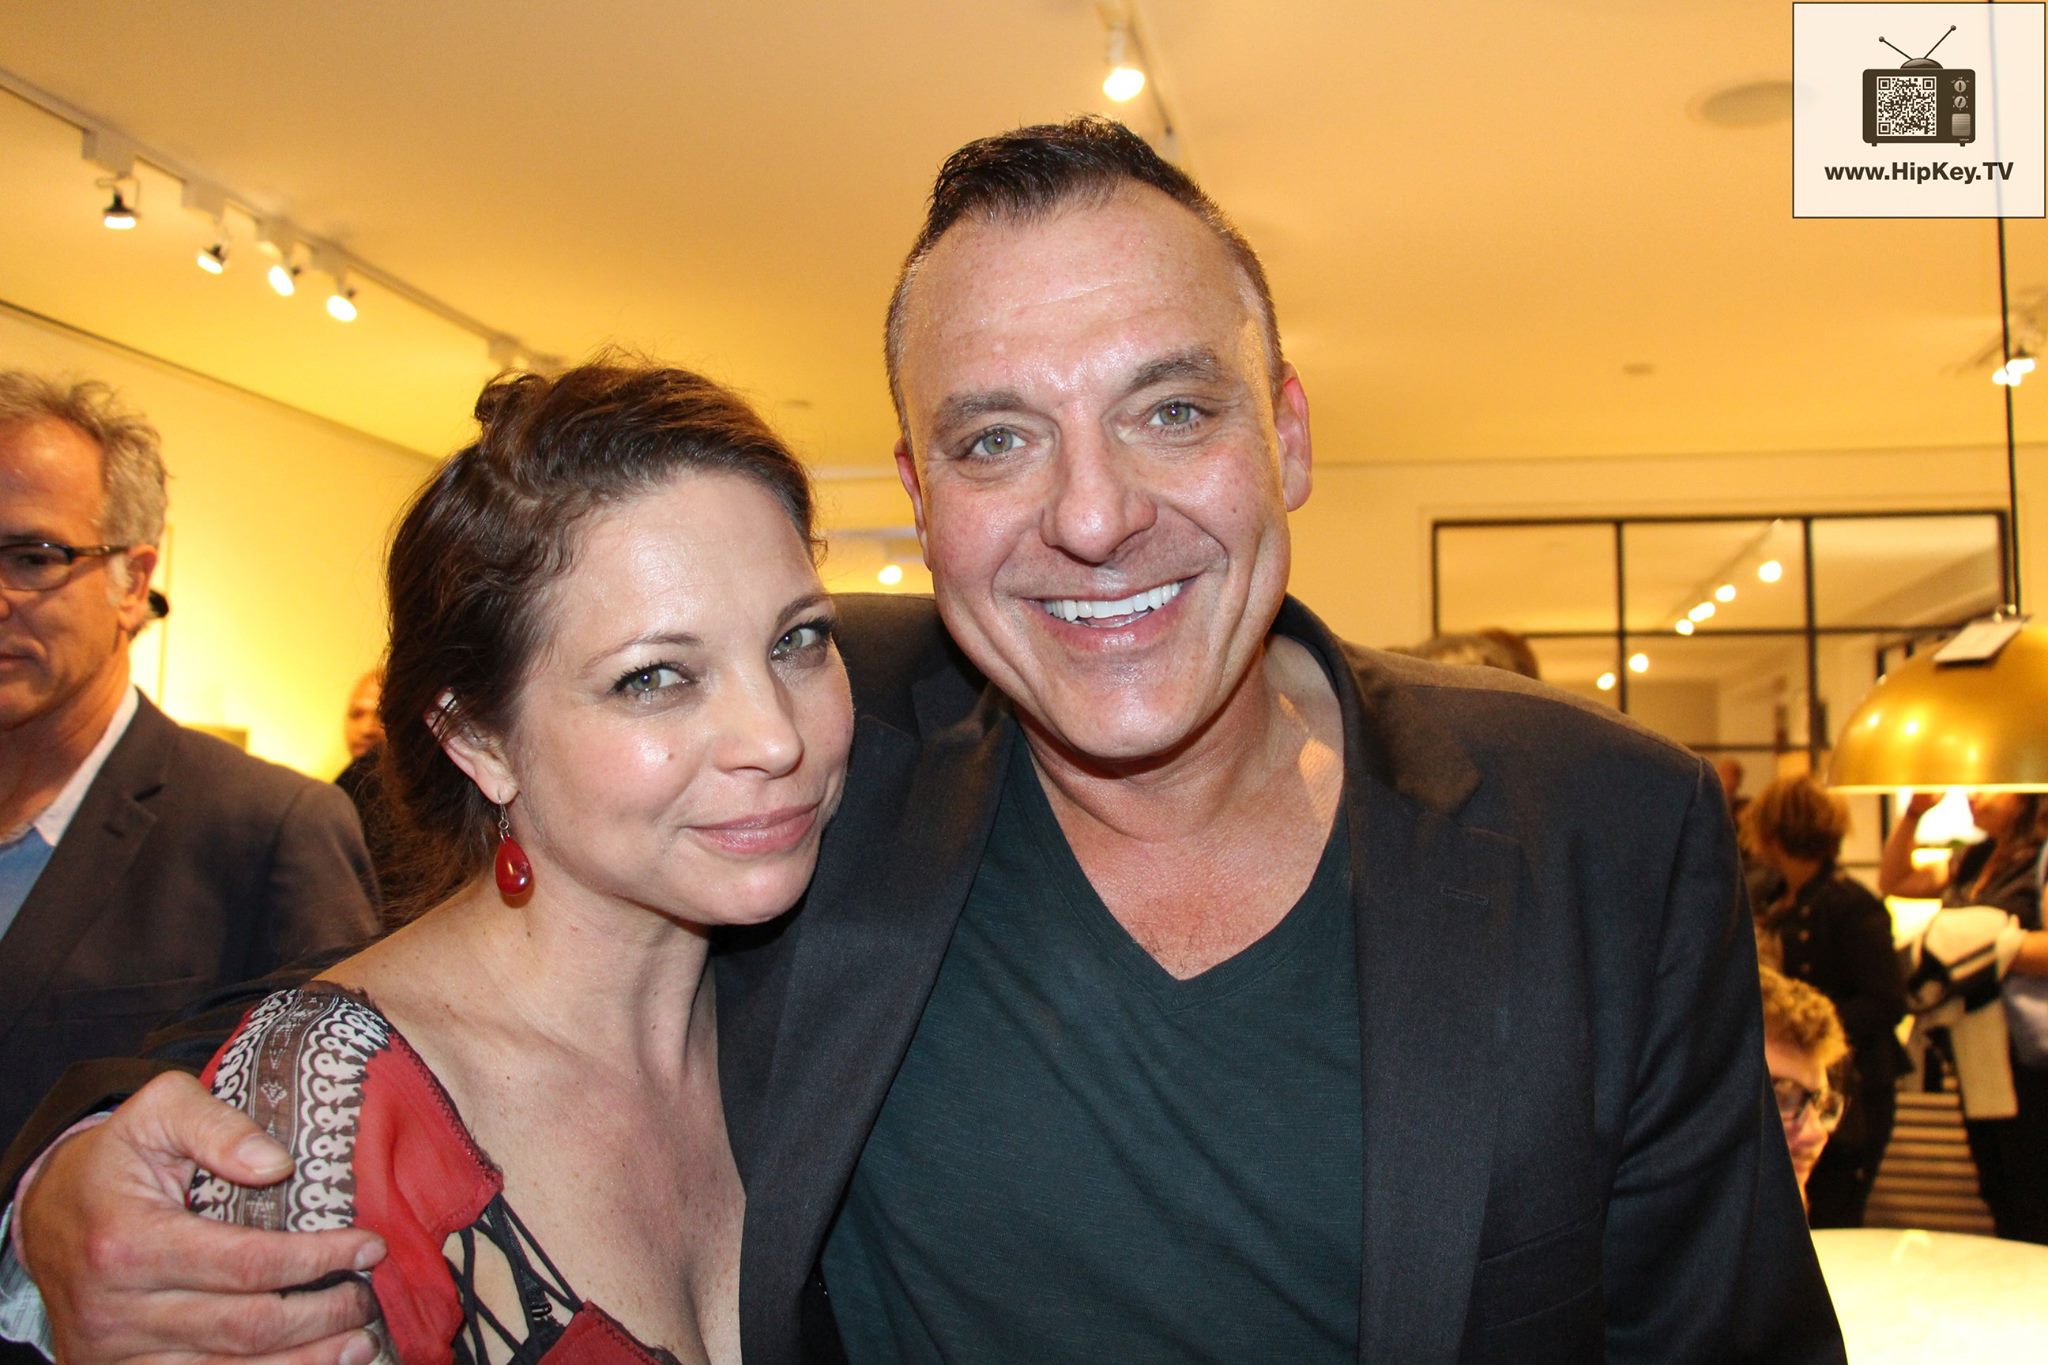 With Tom Sizemore at the Newport Beach Film Festival.